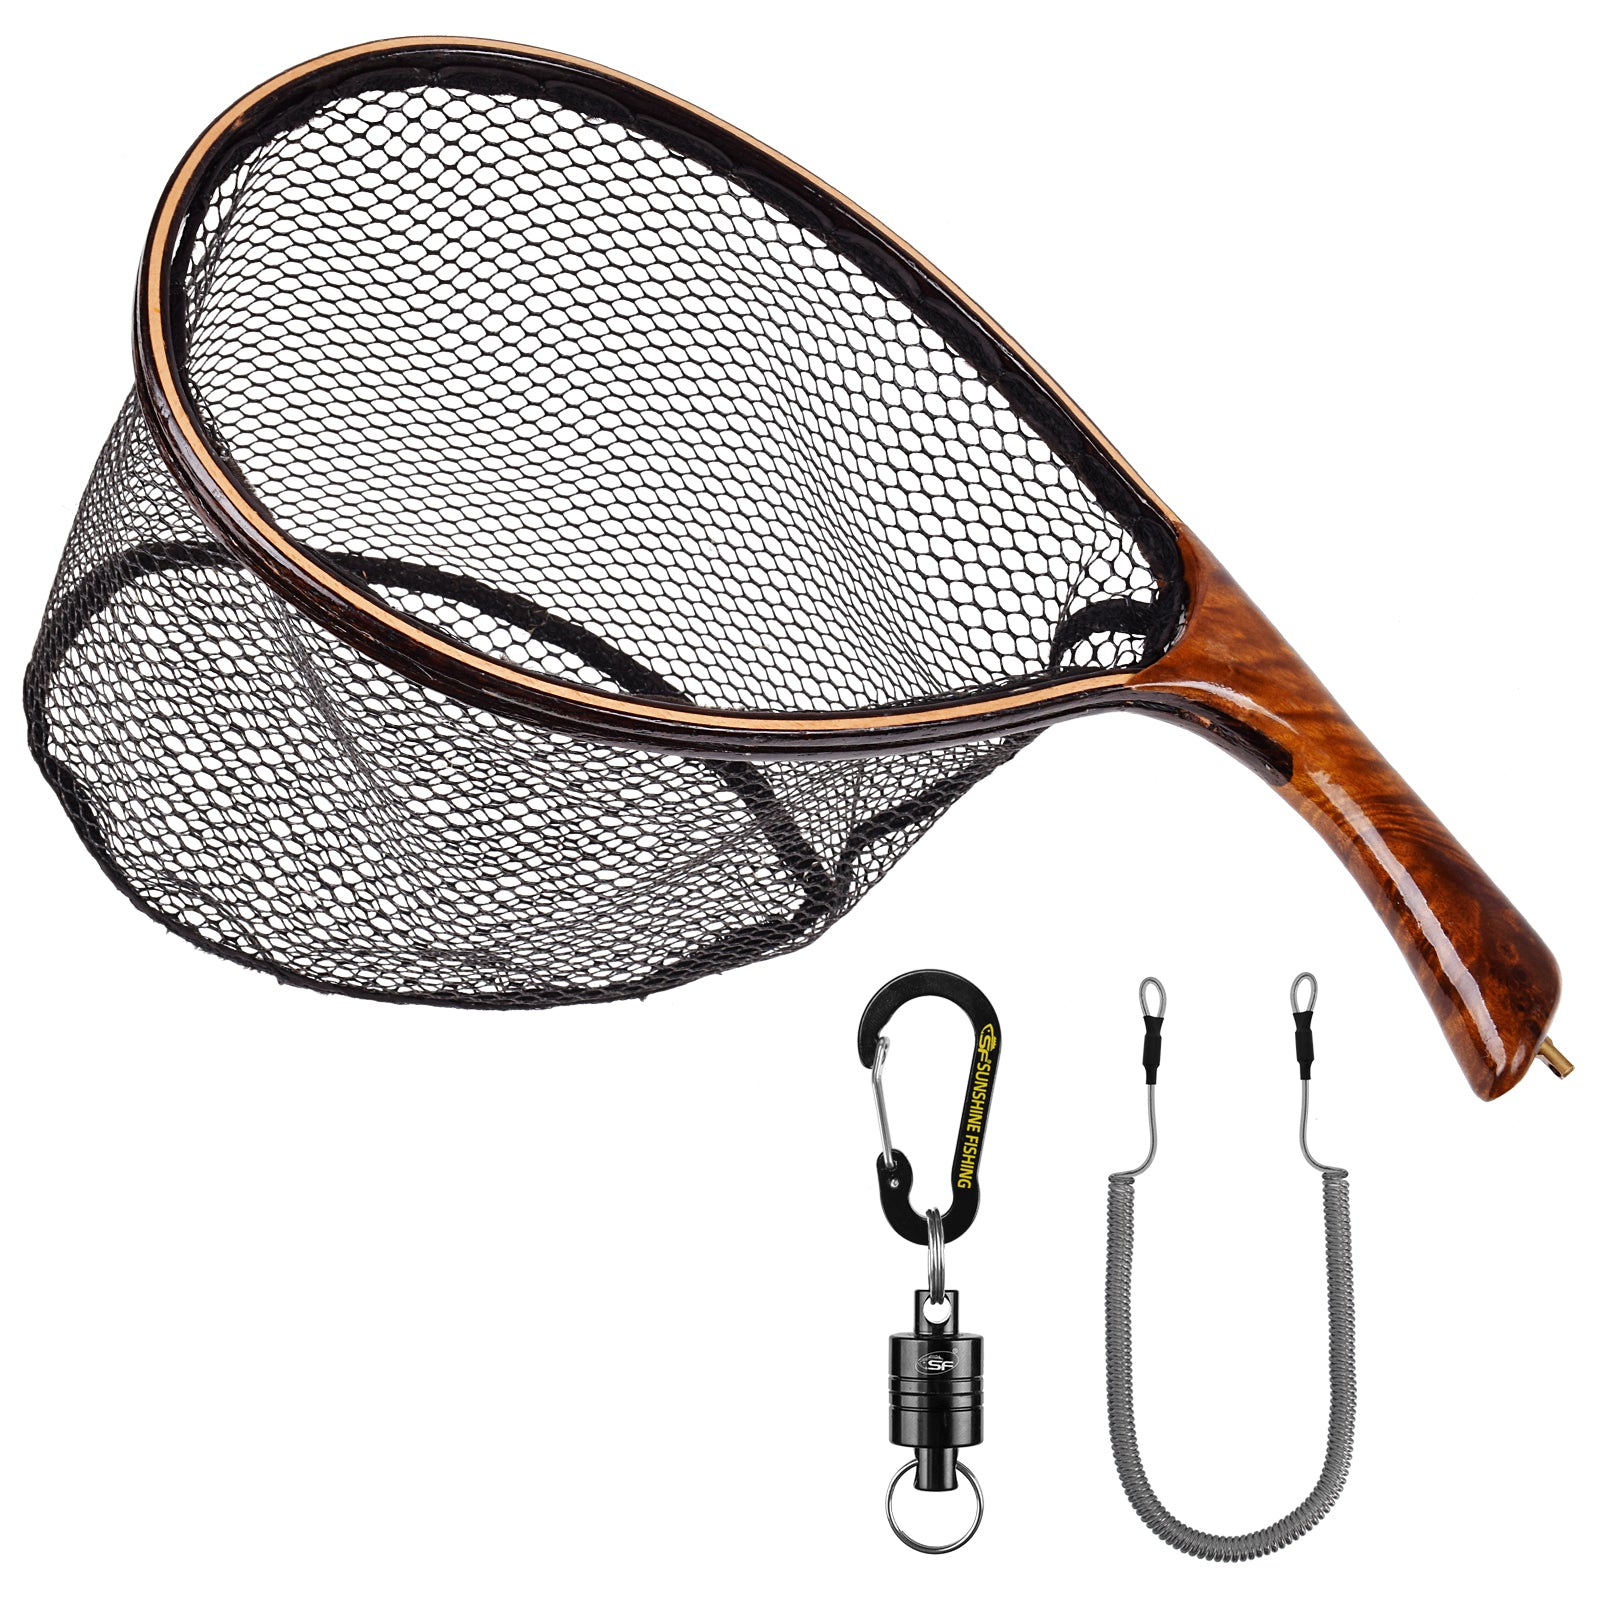 SF Fly Fishing Landing Net with Magnetic Release Curved Handle Wooden